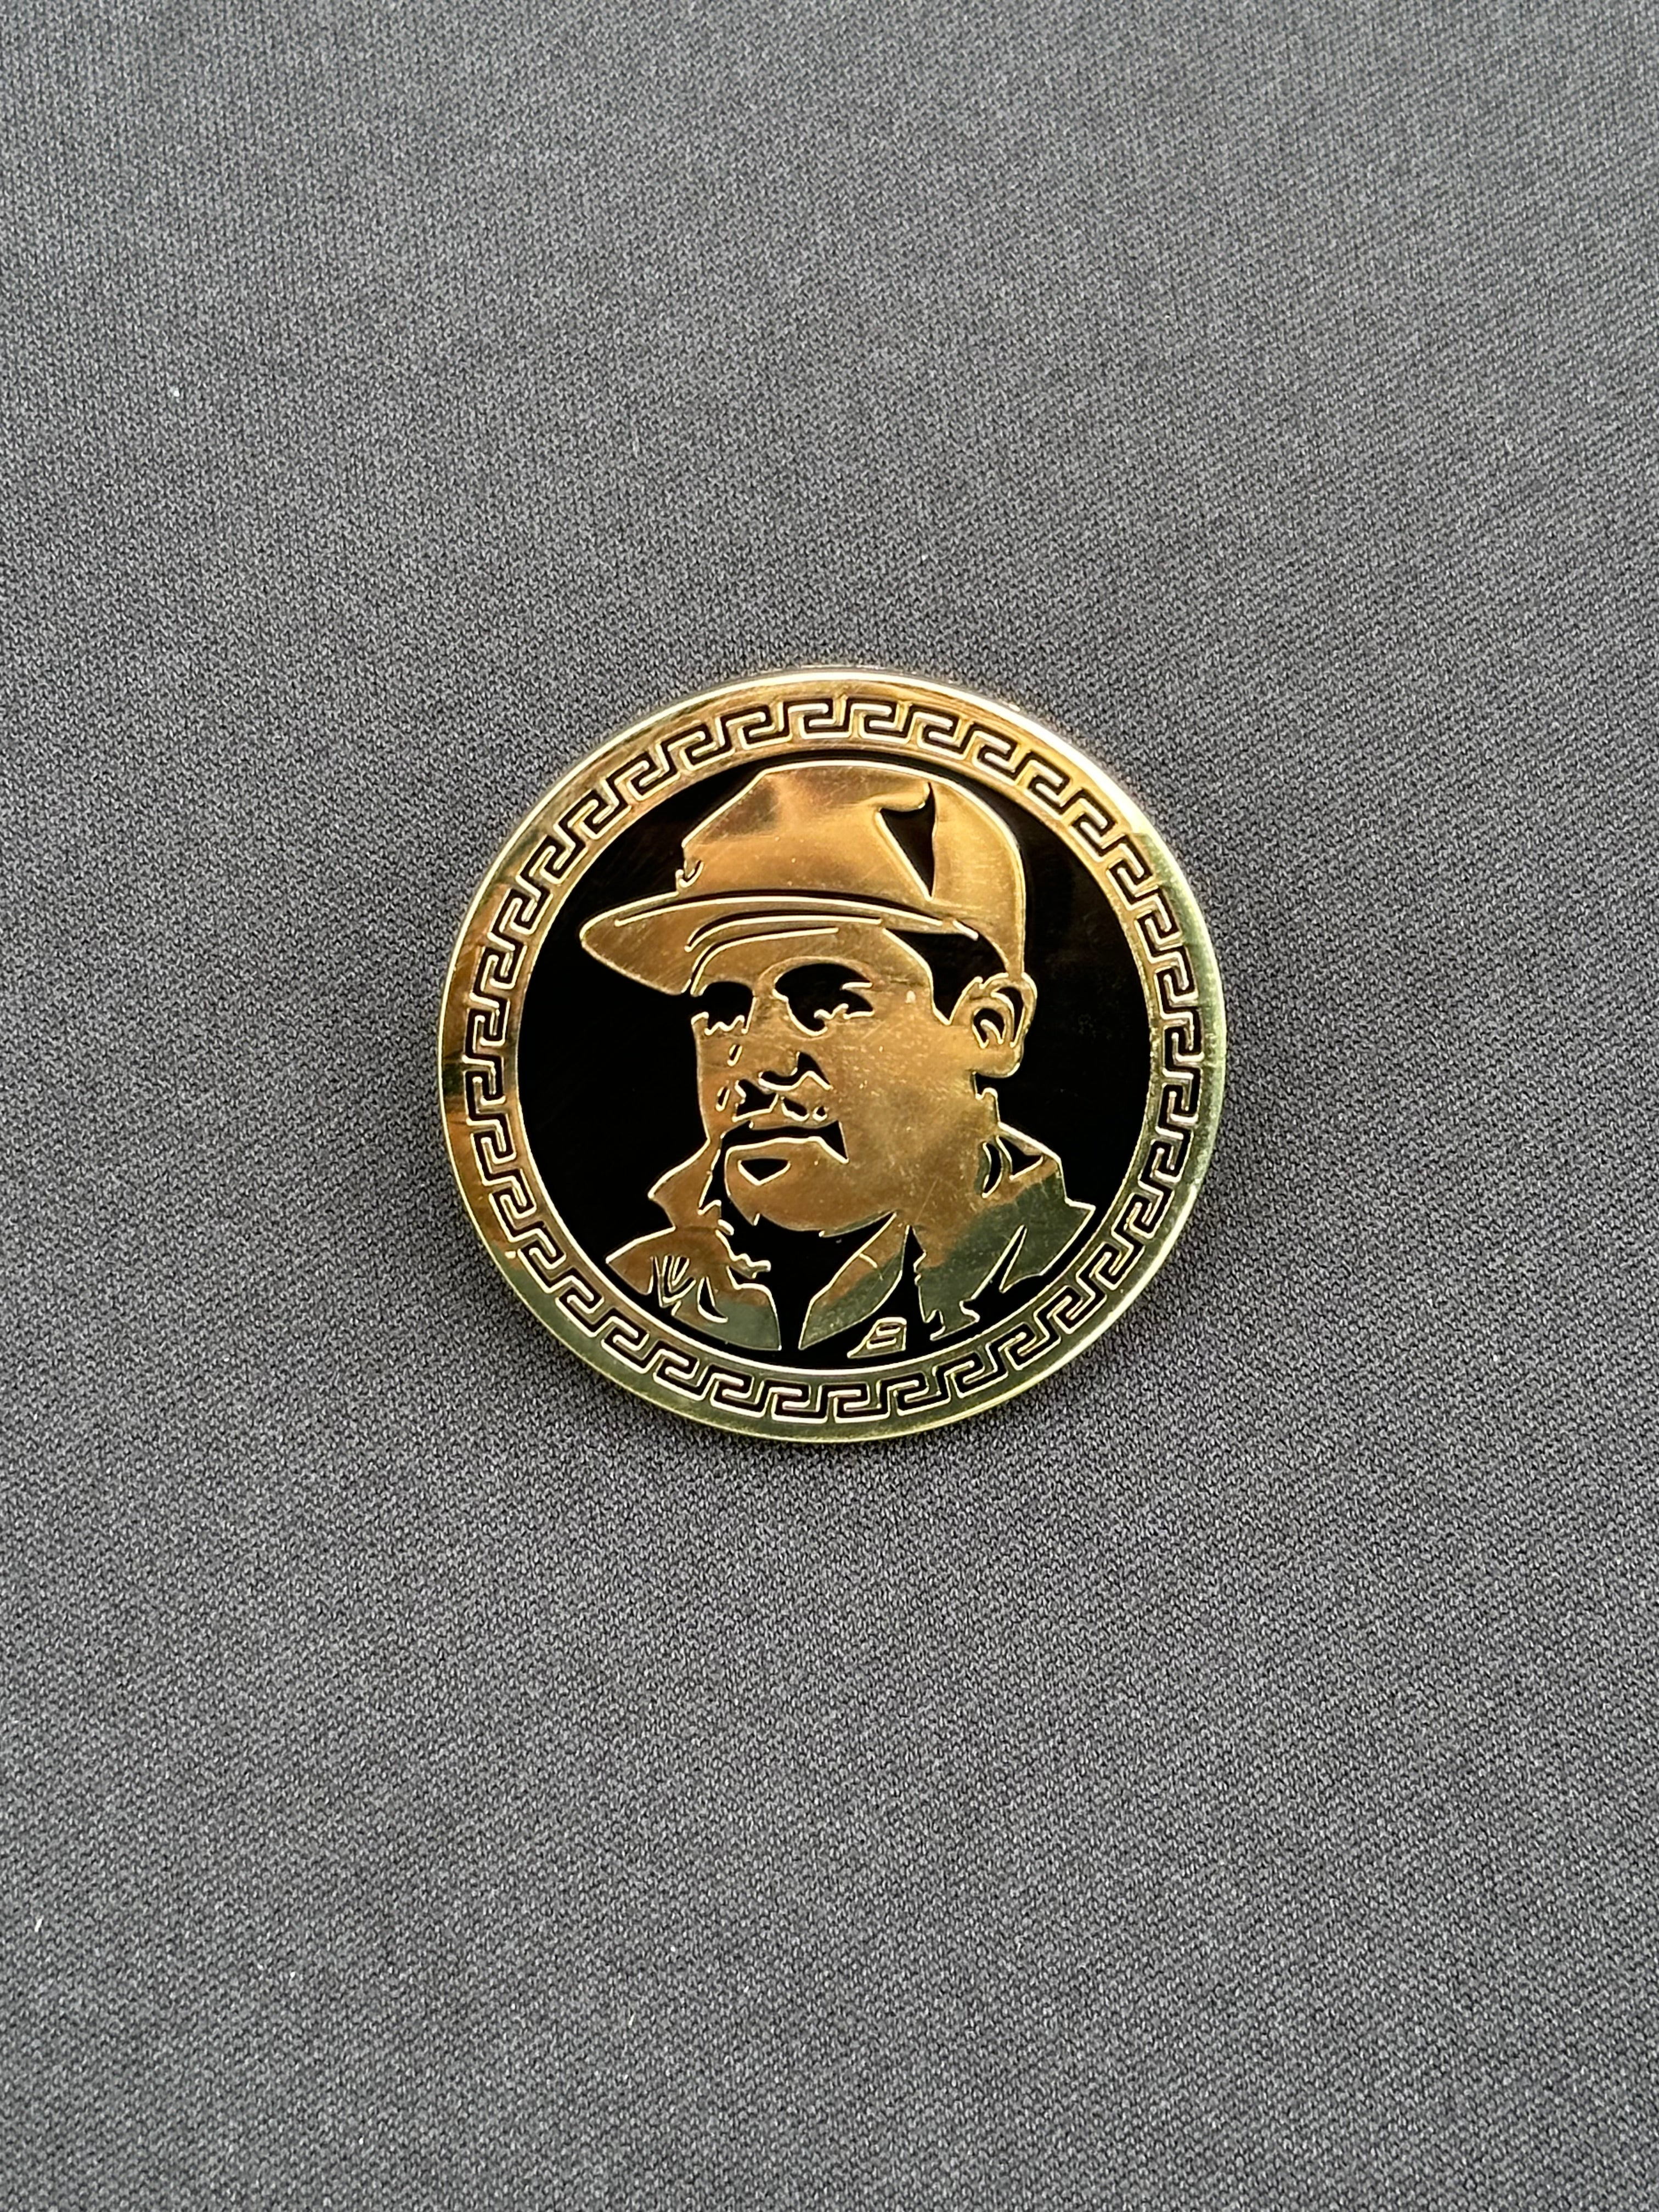 *NEW "EL CHAPO" EXCLUSIVE COIN PIN VERY LIMITED